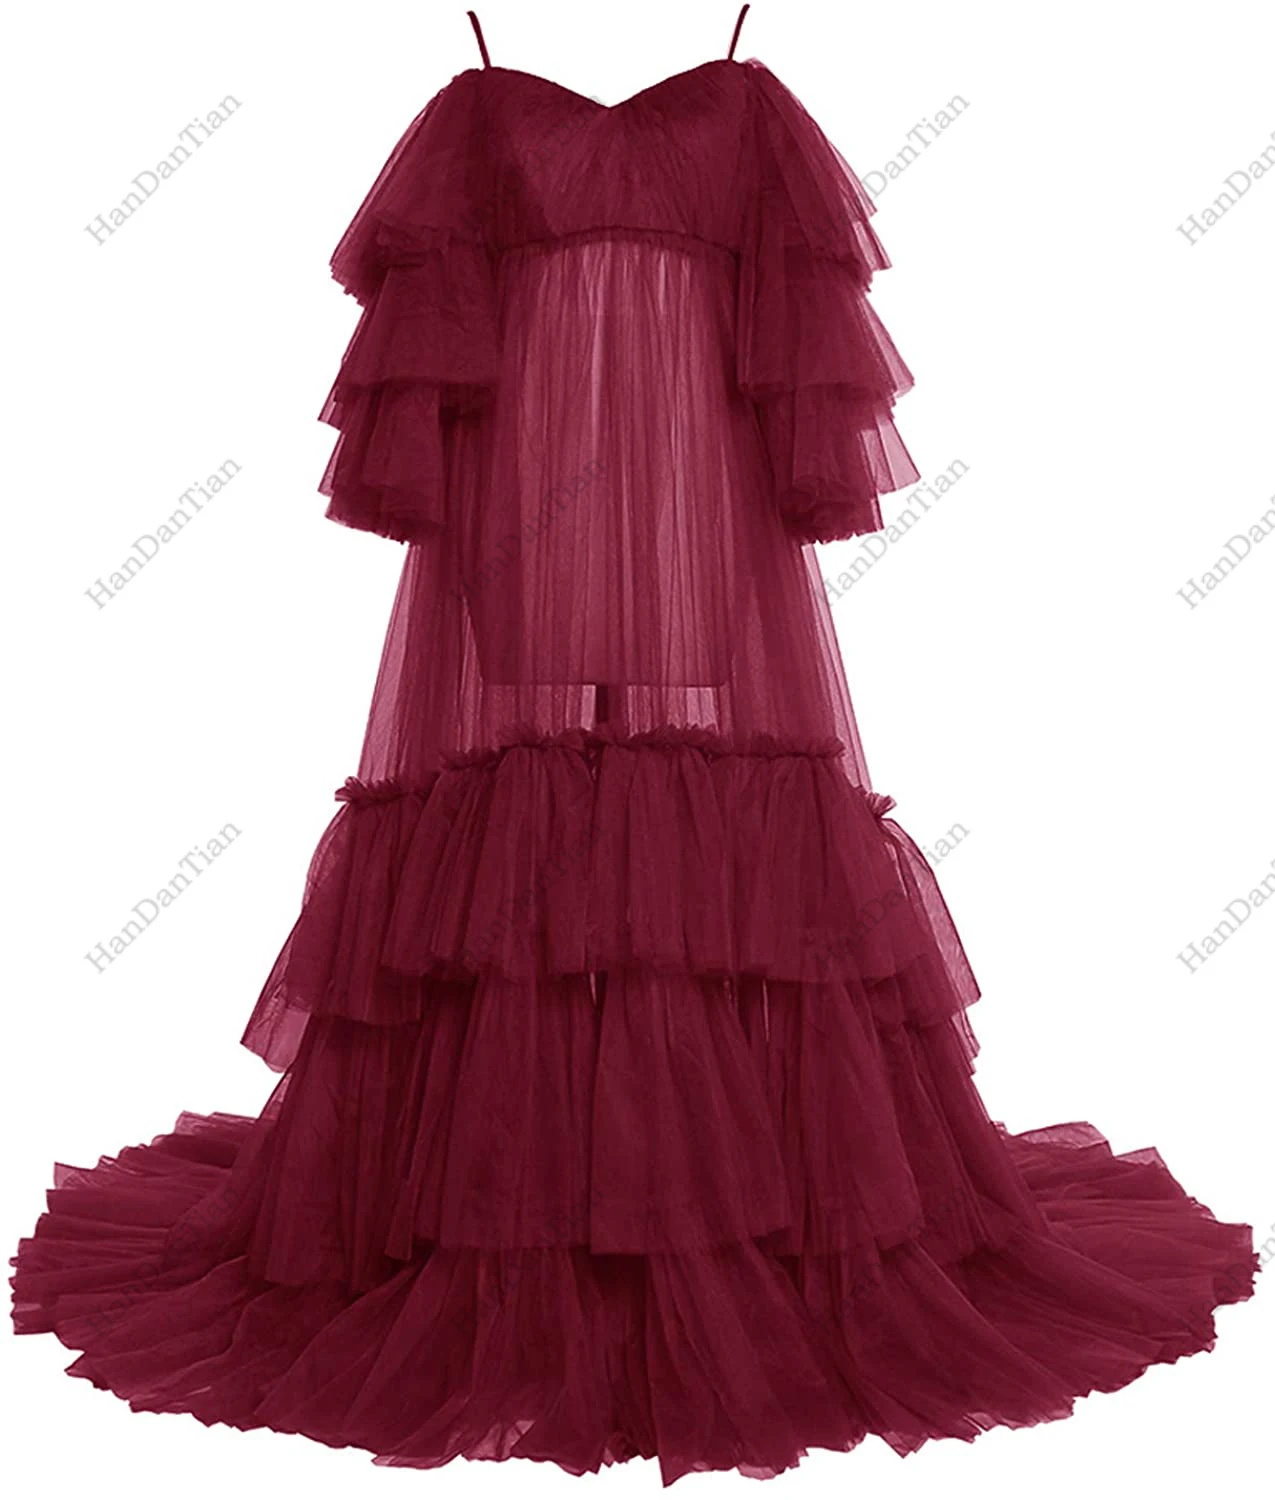 Women's dresses see-through transparent long tulle robe loose maternity photo shoot